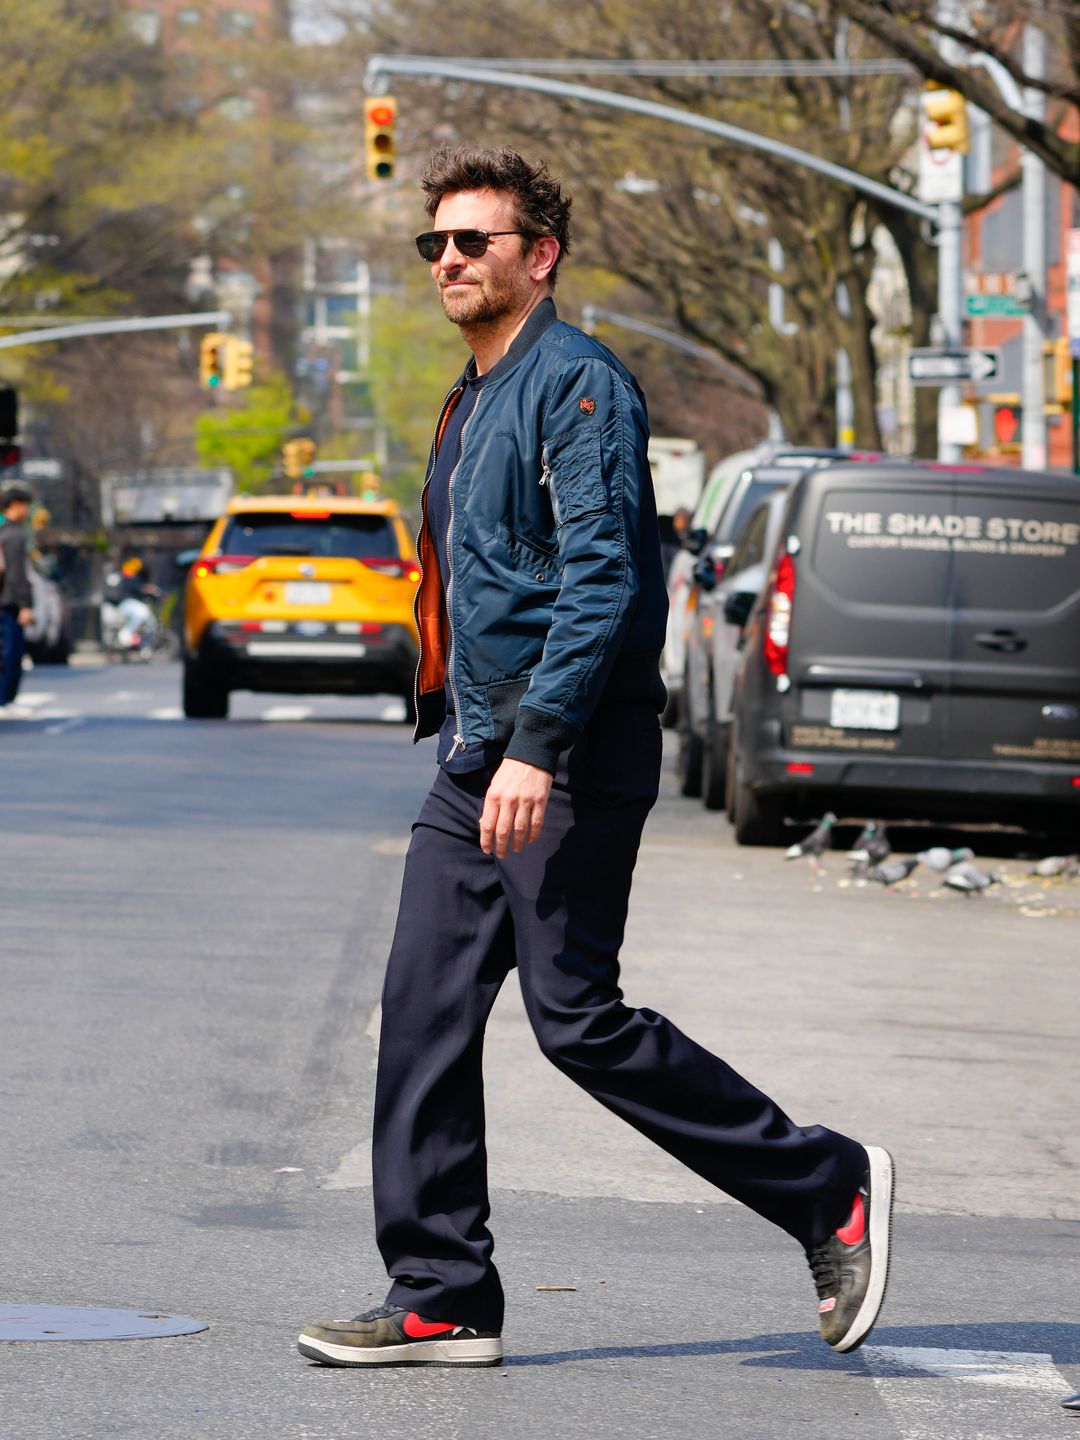 Oscar Nominated actor Bradley Cooper is taking style cues from ...